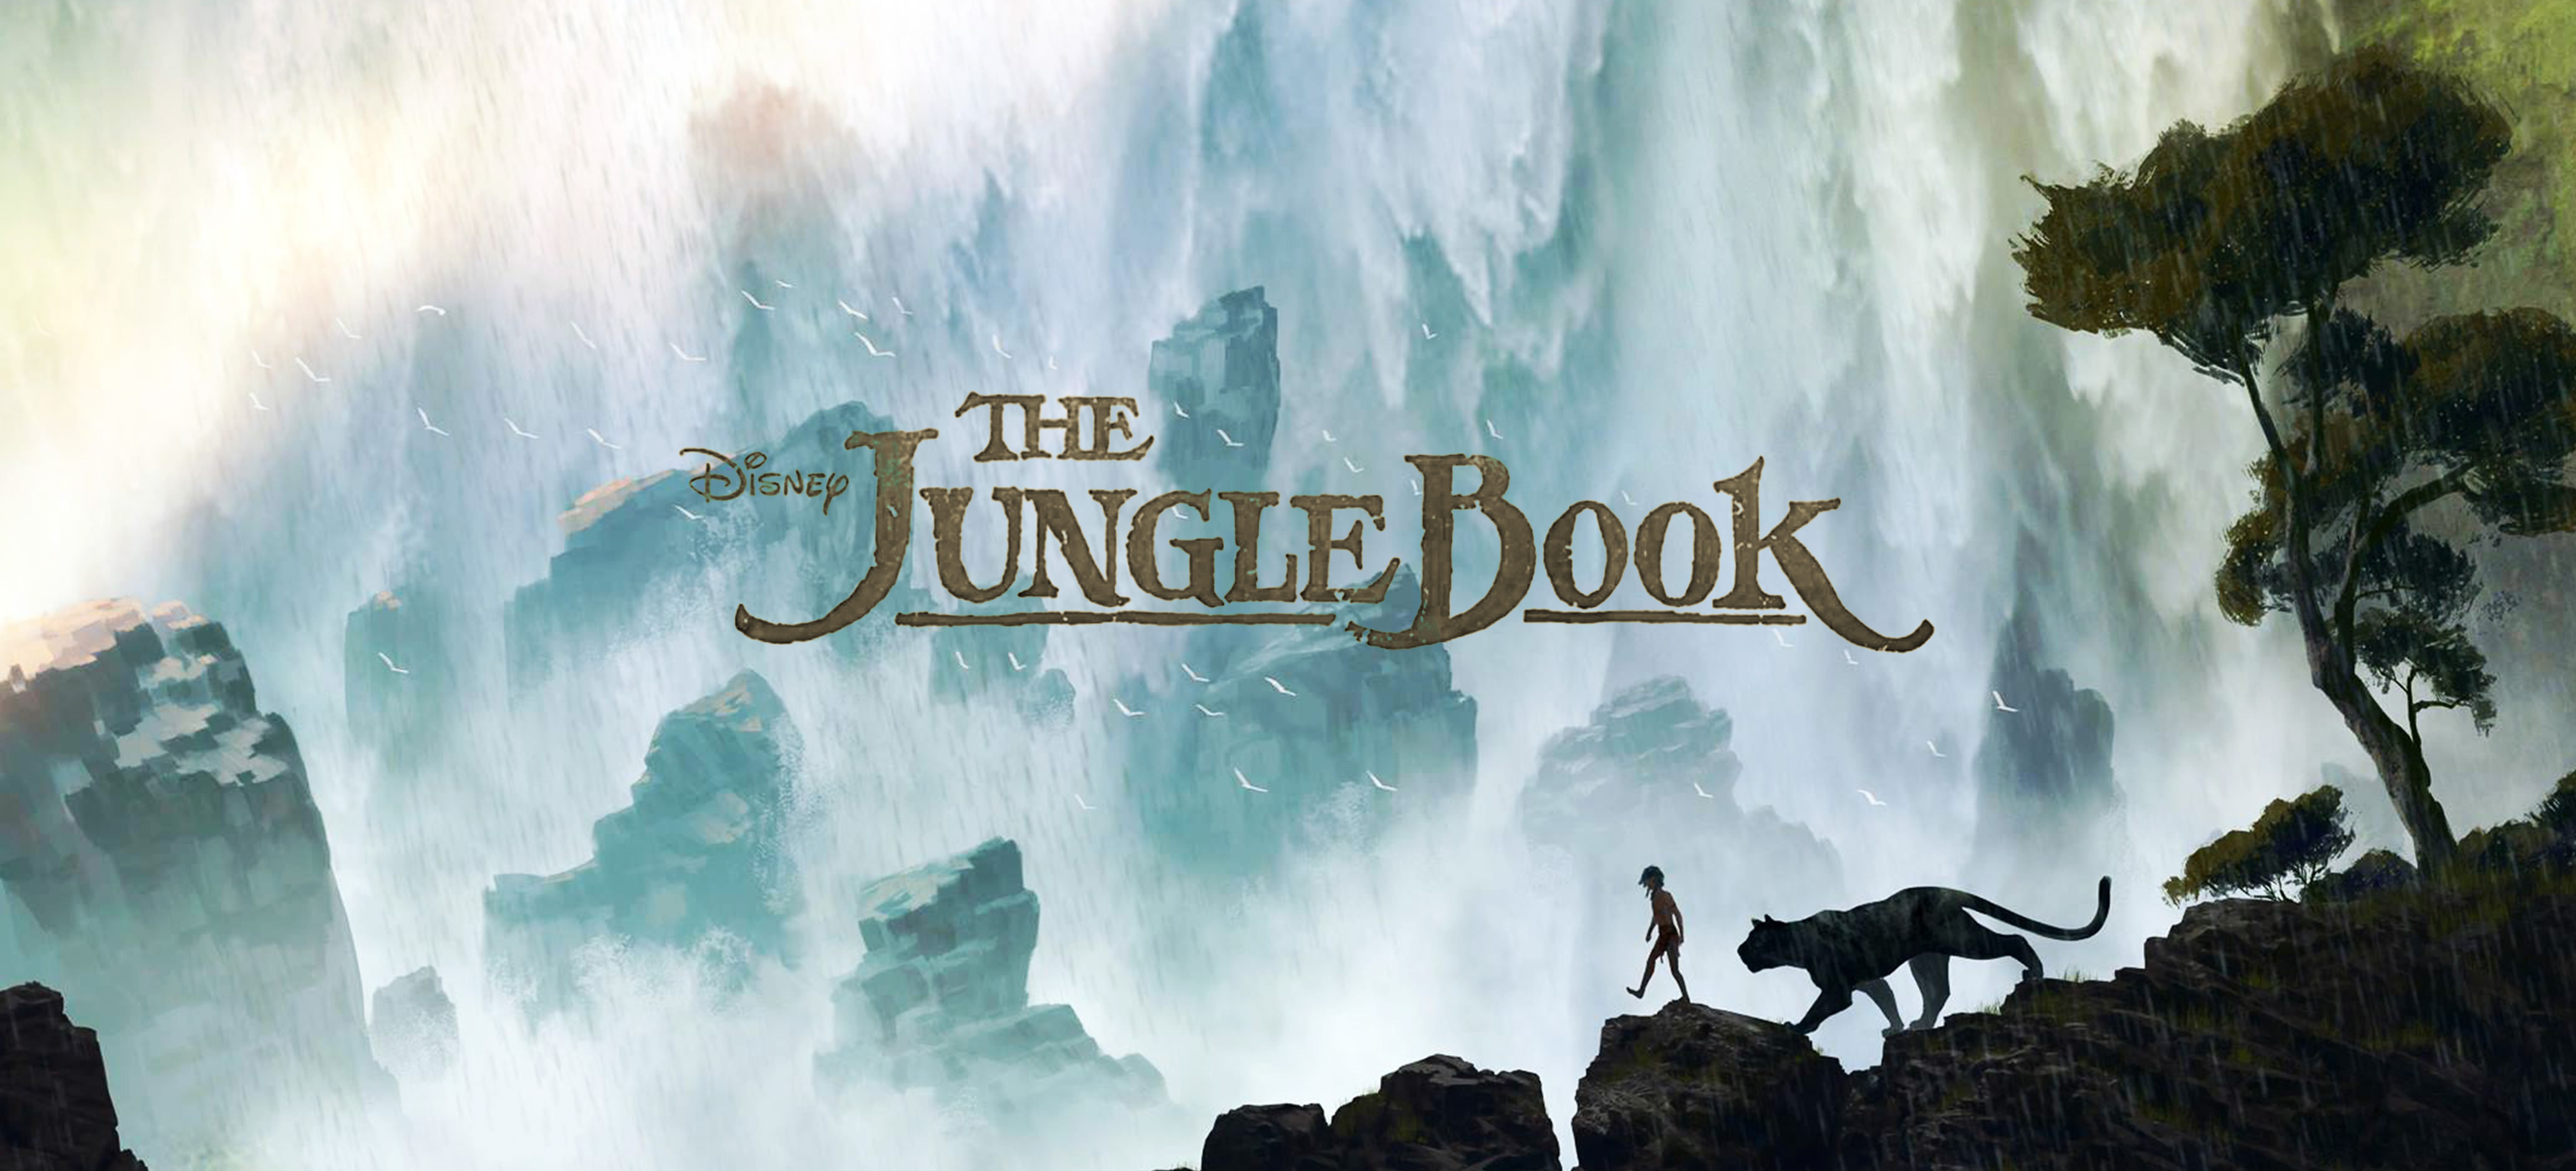 review of jungle book